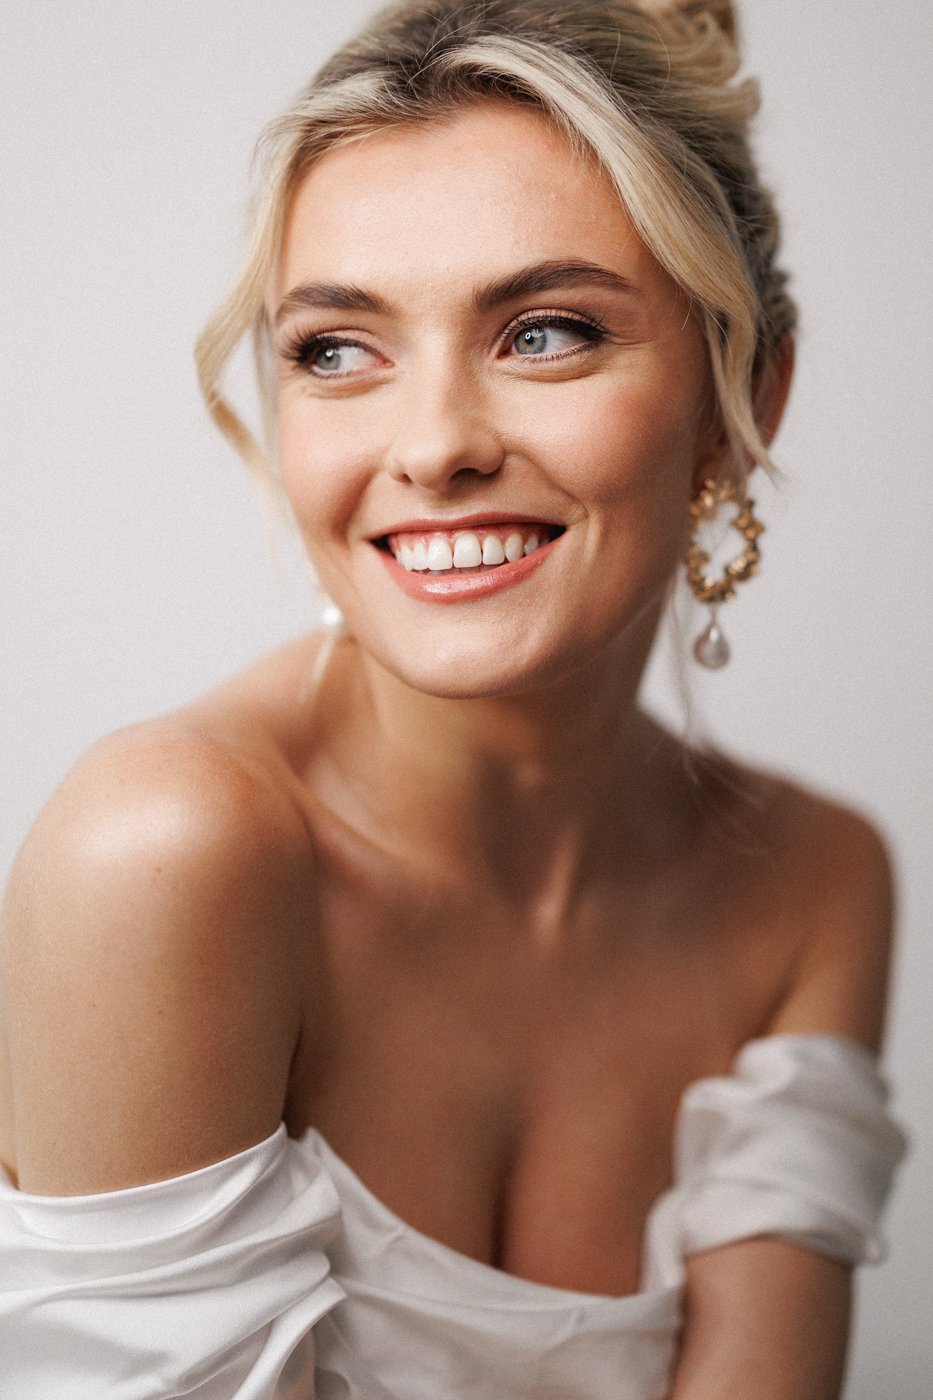 Contemporary-modern-bridal hair and makeup-Lottie Topping-43.jpg